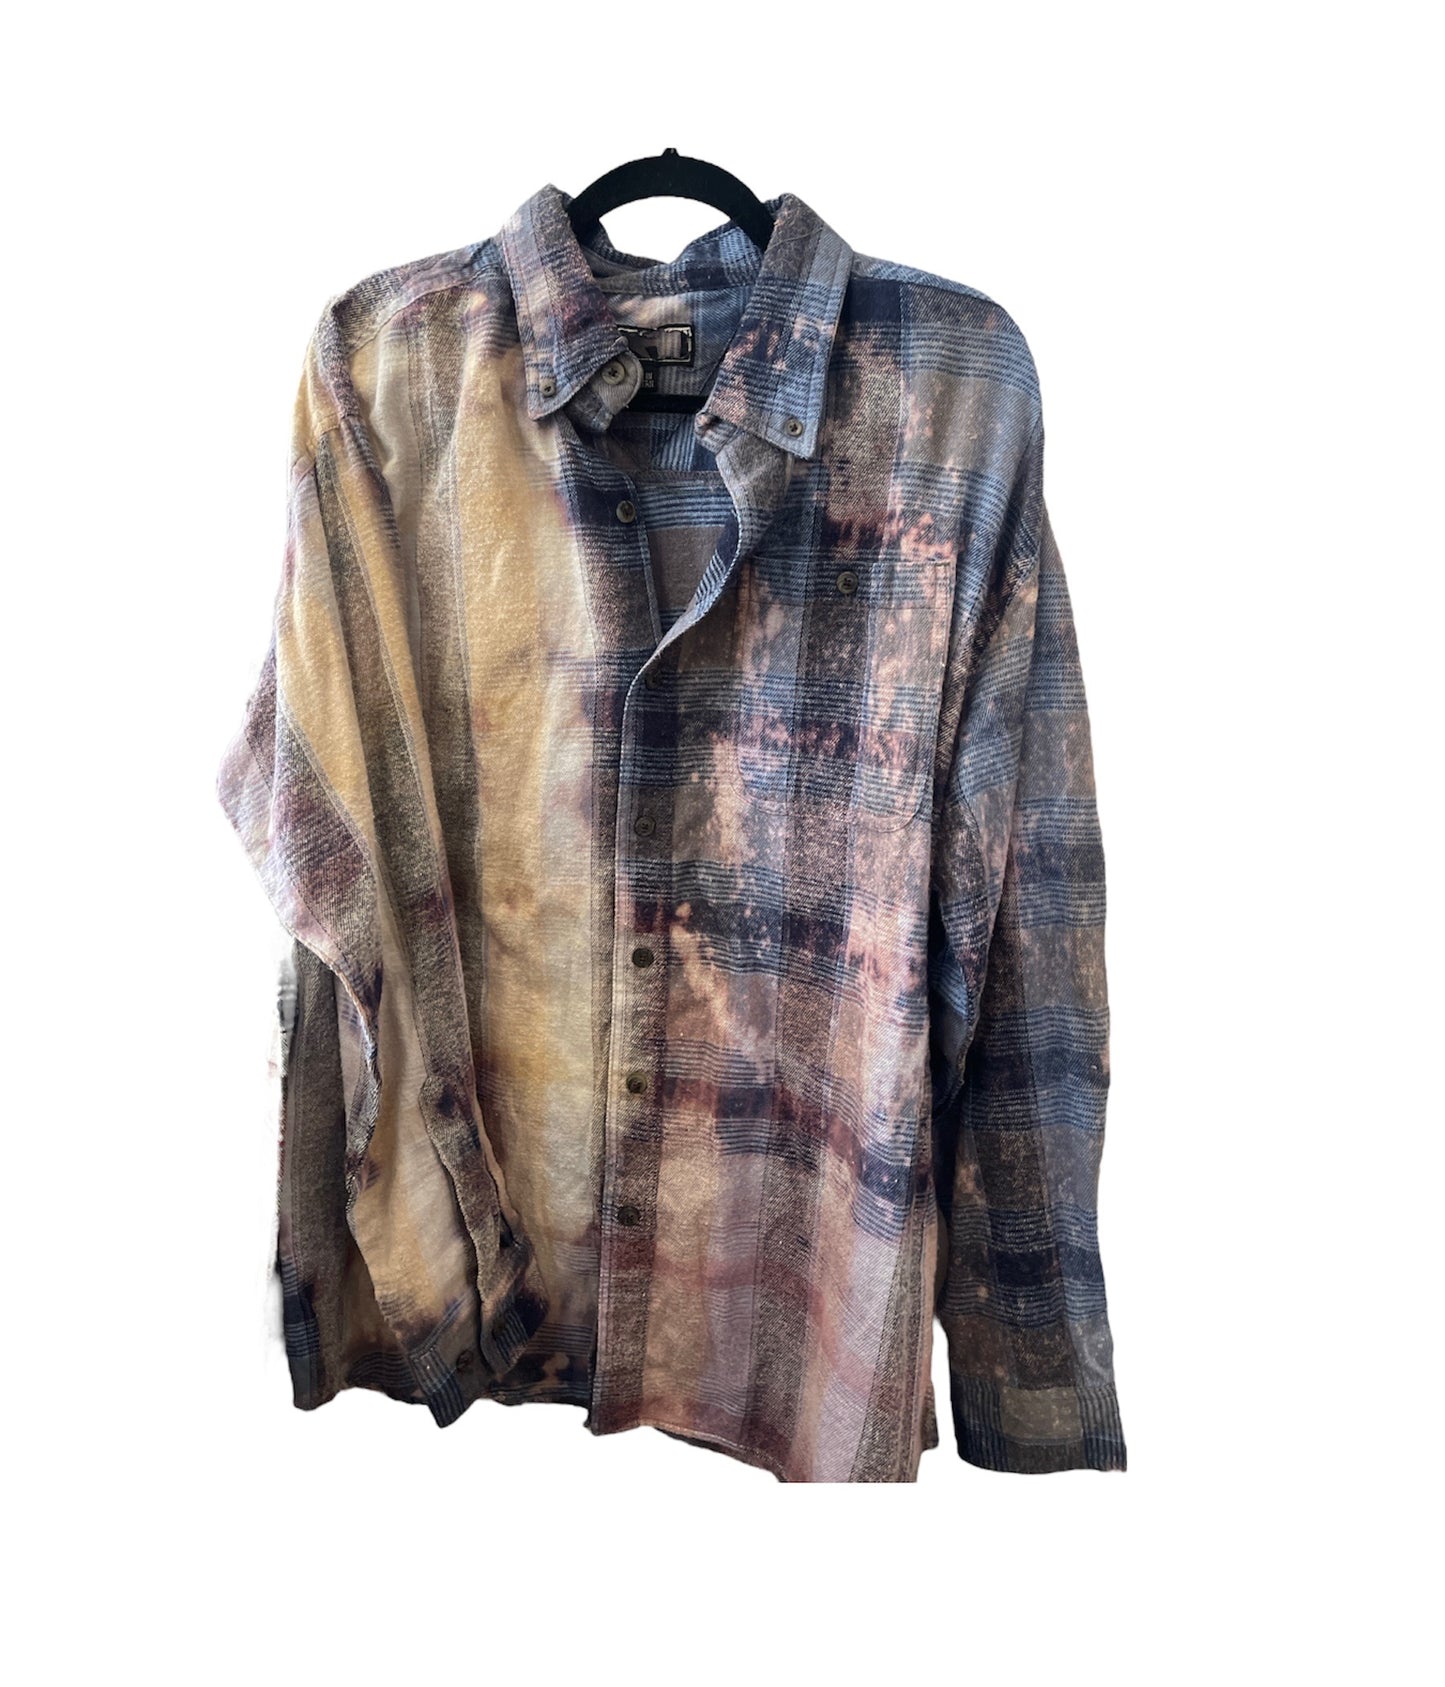 Bleached flannels